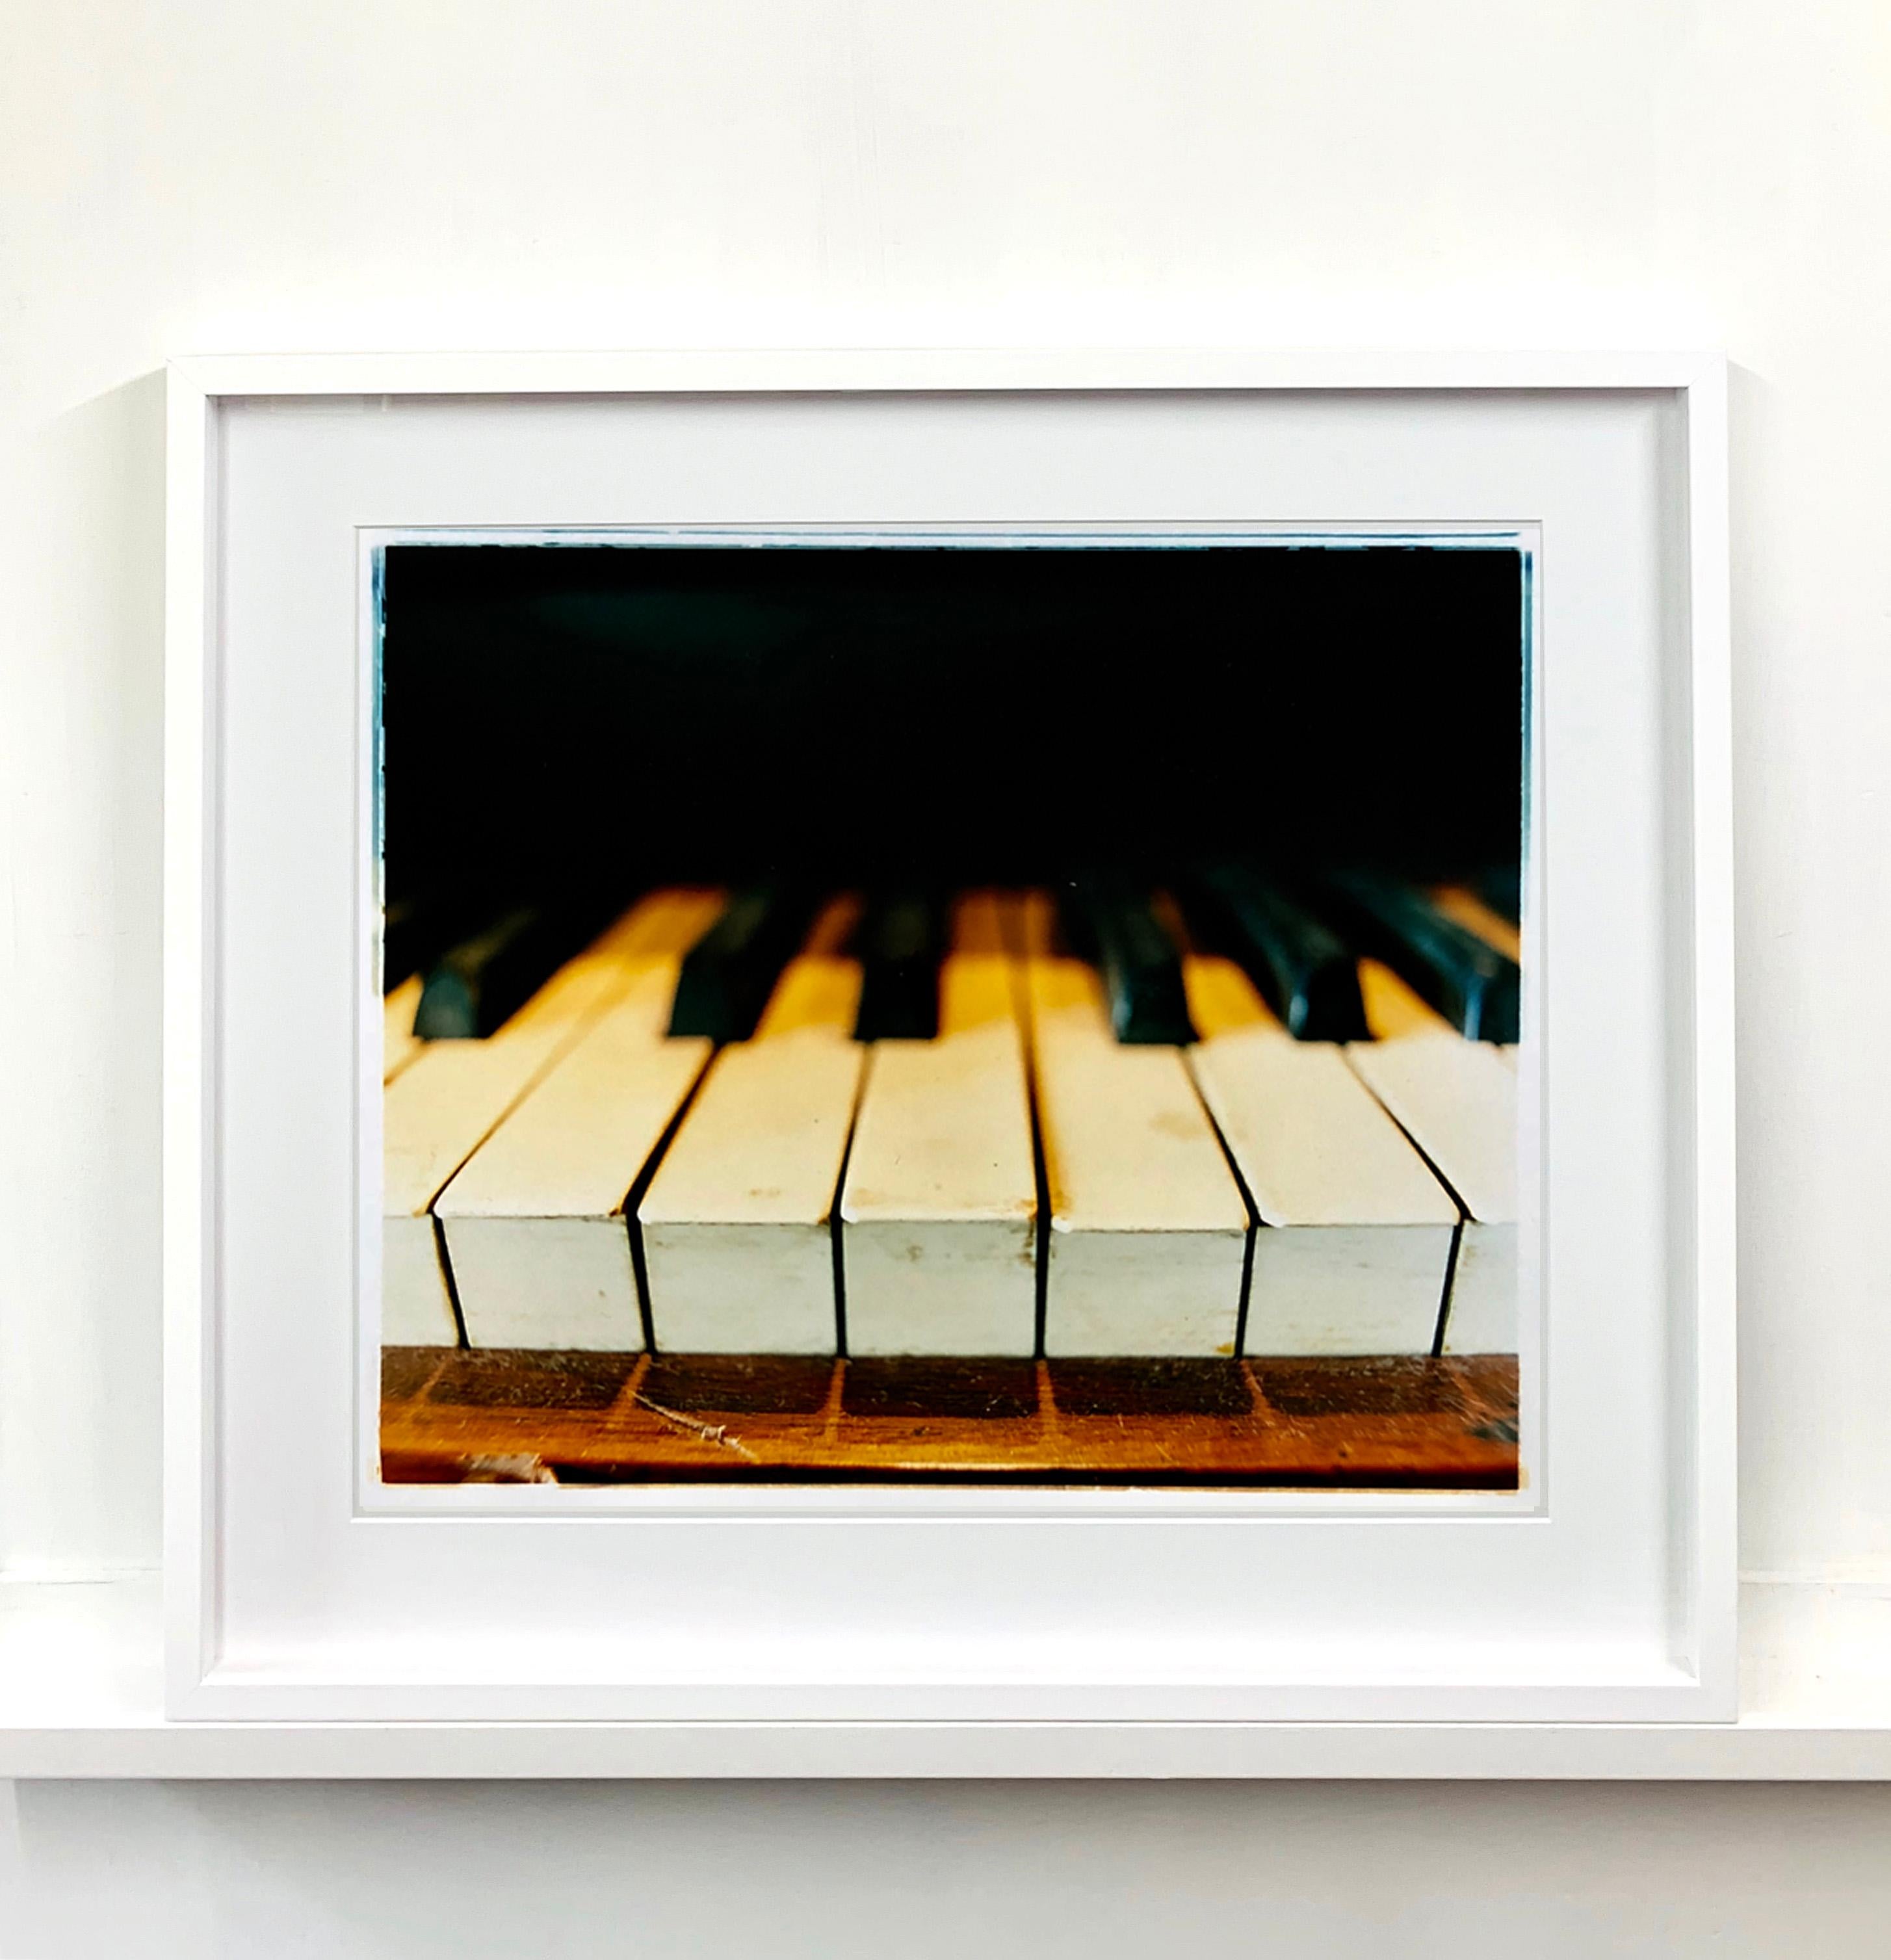 Piano Keys, Stockton-on-Tees - Music color photography - Contemporary Print by Richard Heeps